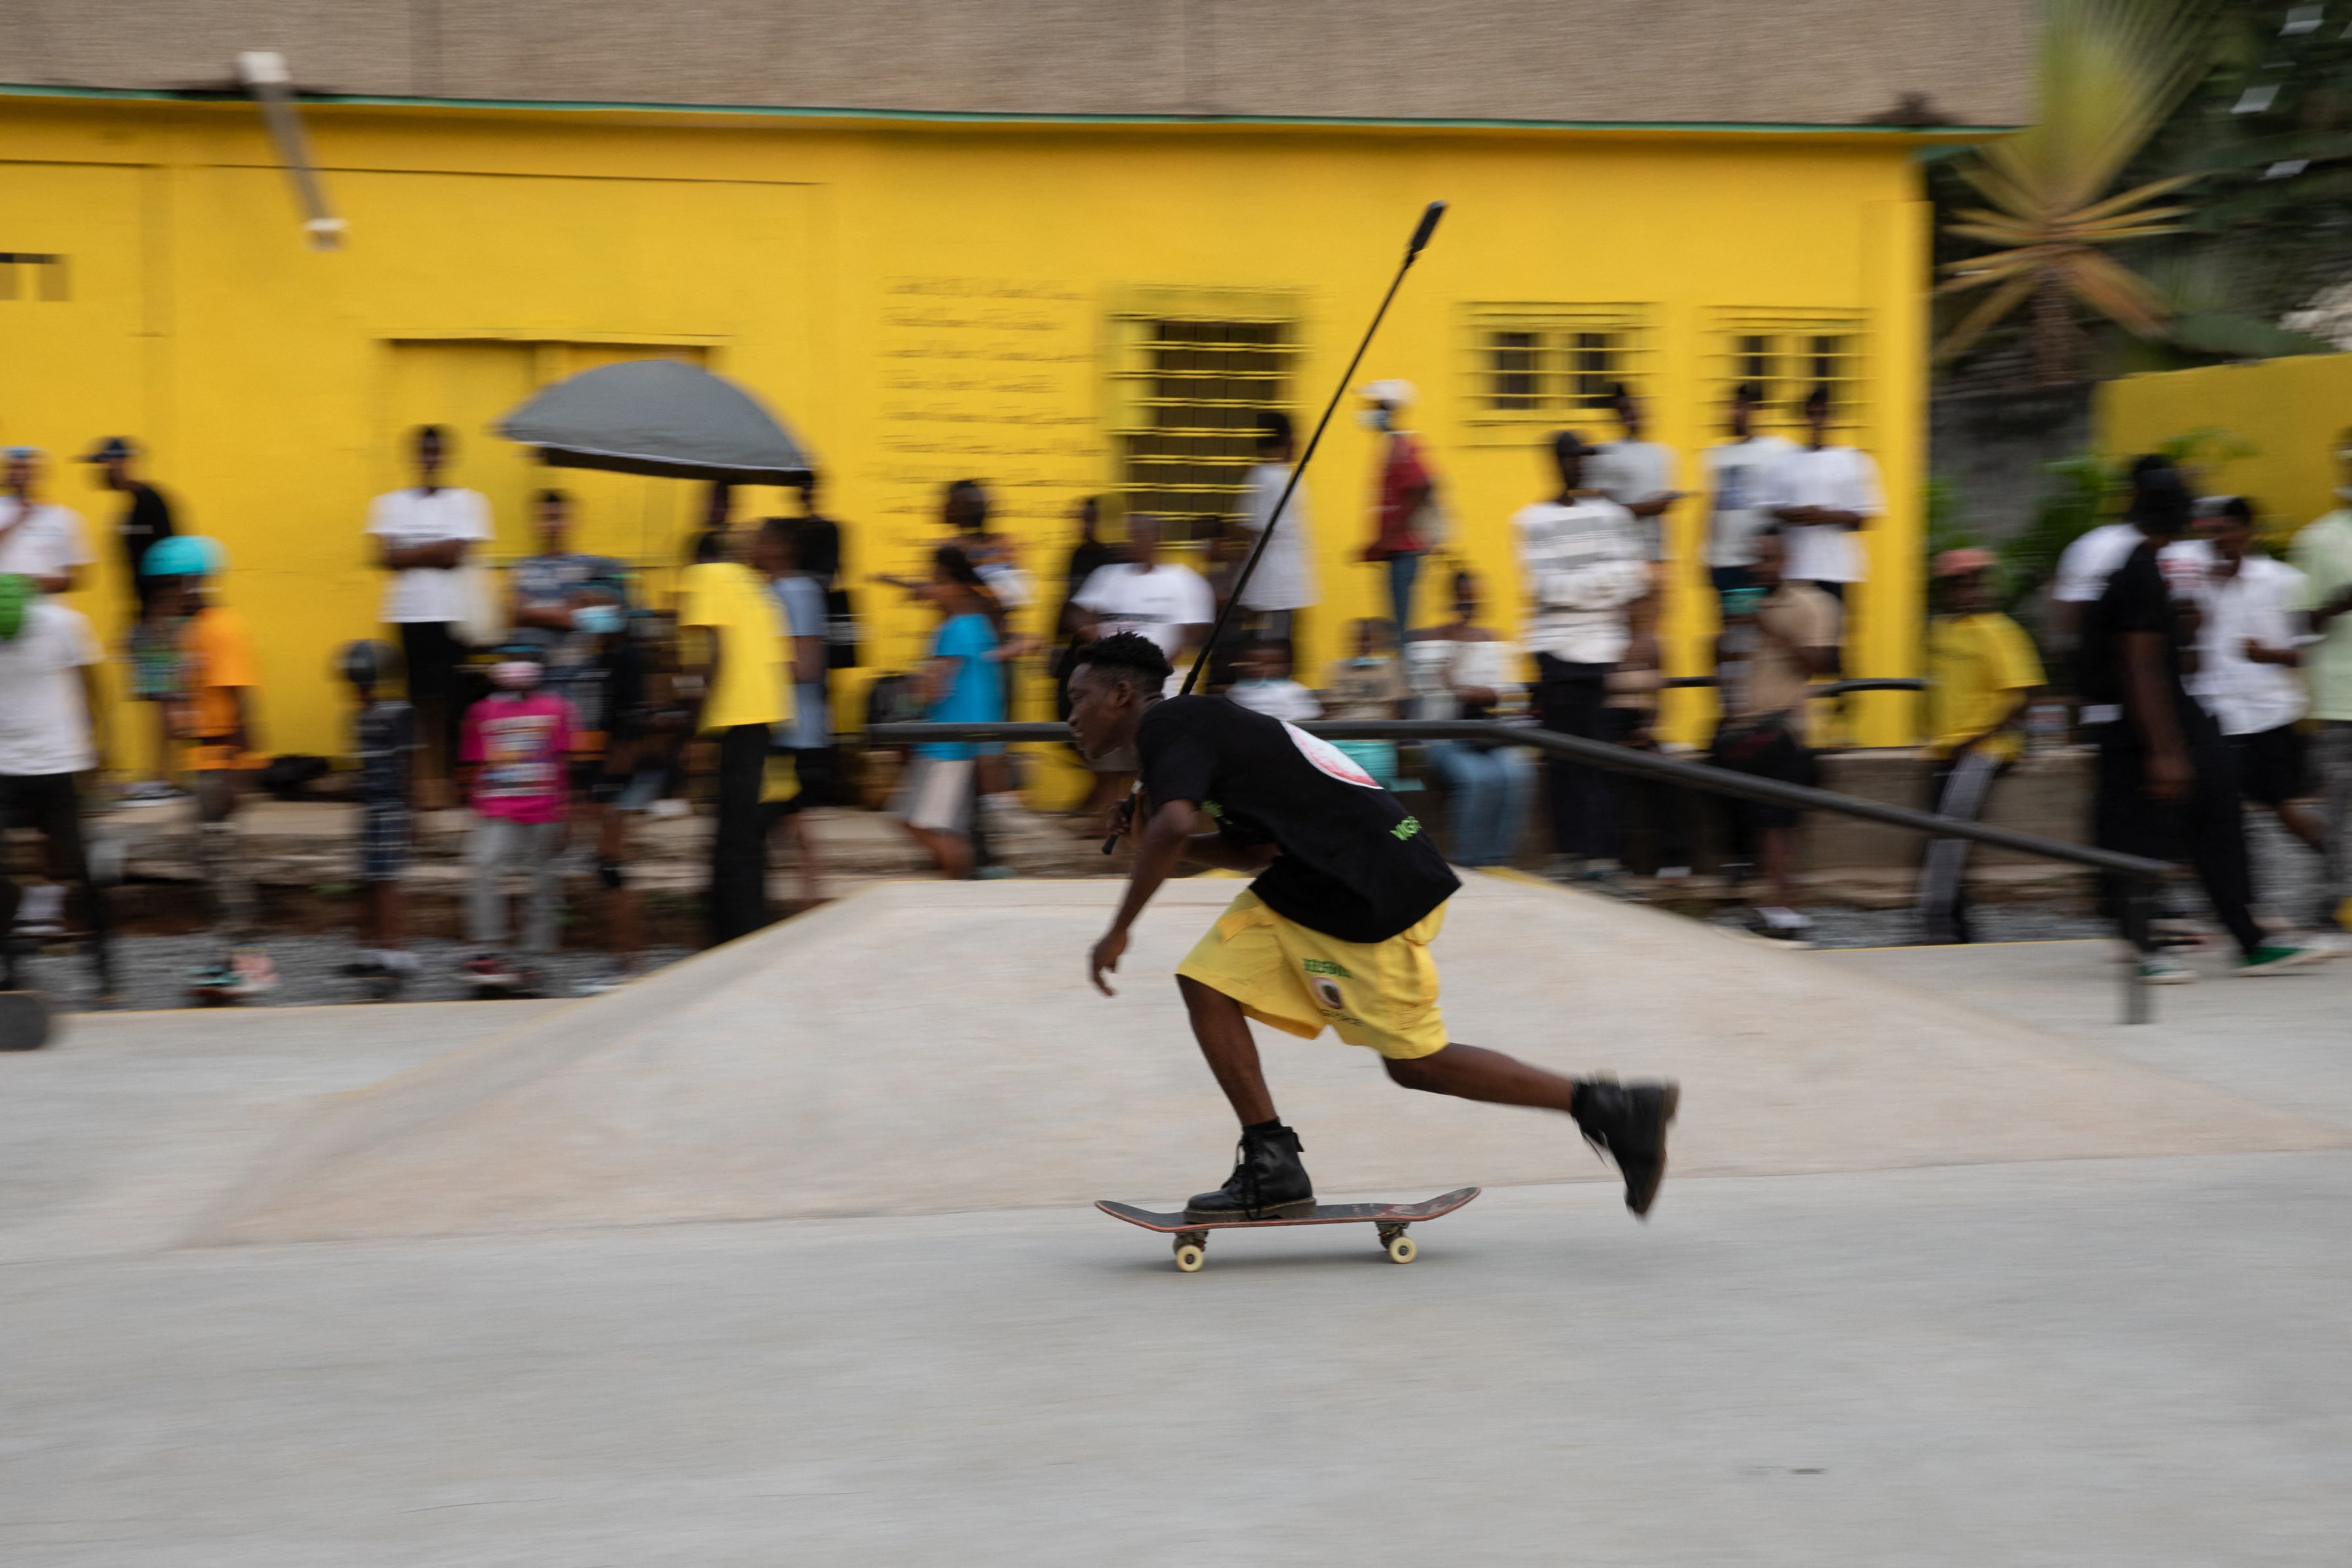 Virgil Abloh and Daily Paper Link Up to Help Bring New Skate Park to Ghana